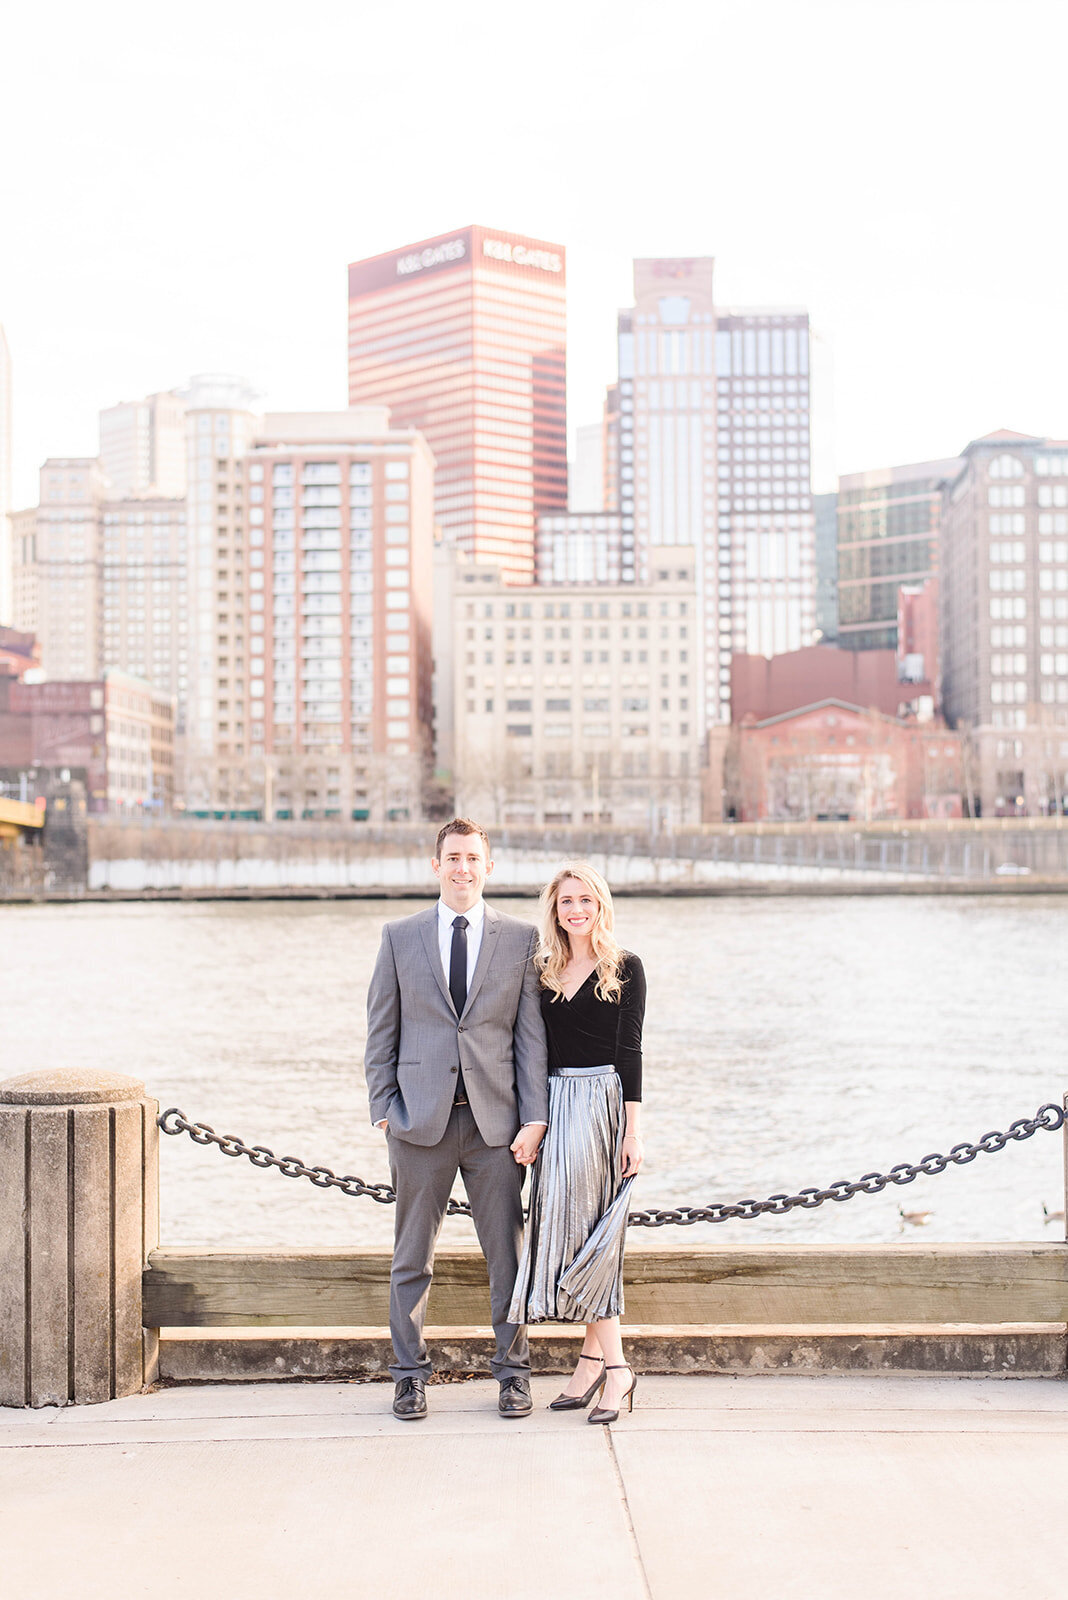 kelsey-ross-downtown-pittsburgh-engagement-photos-14